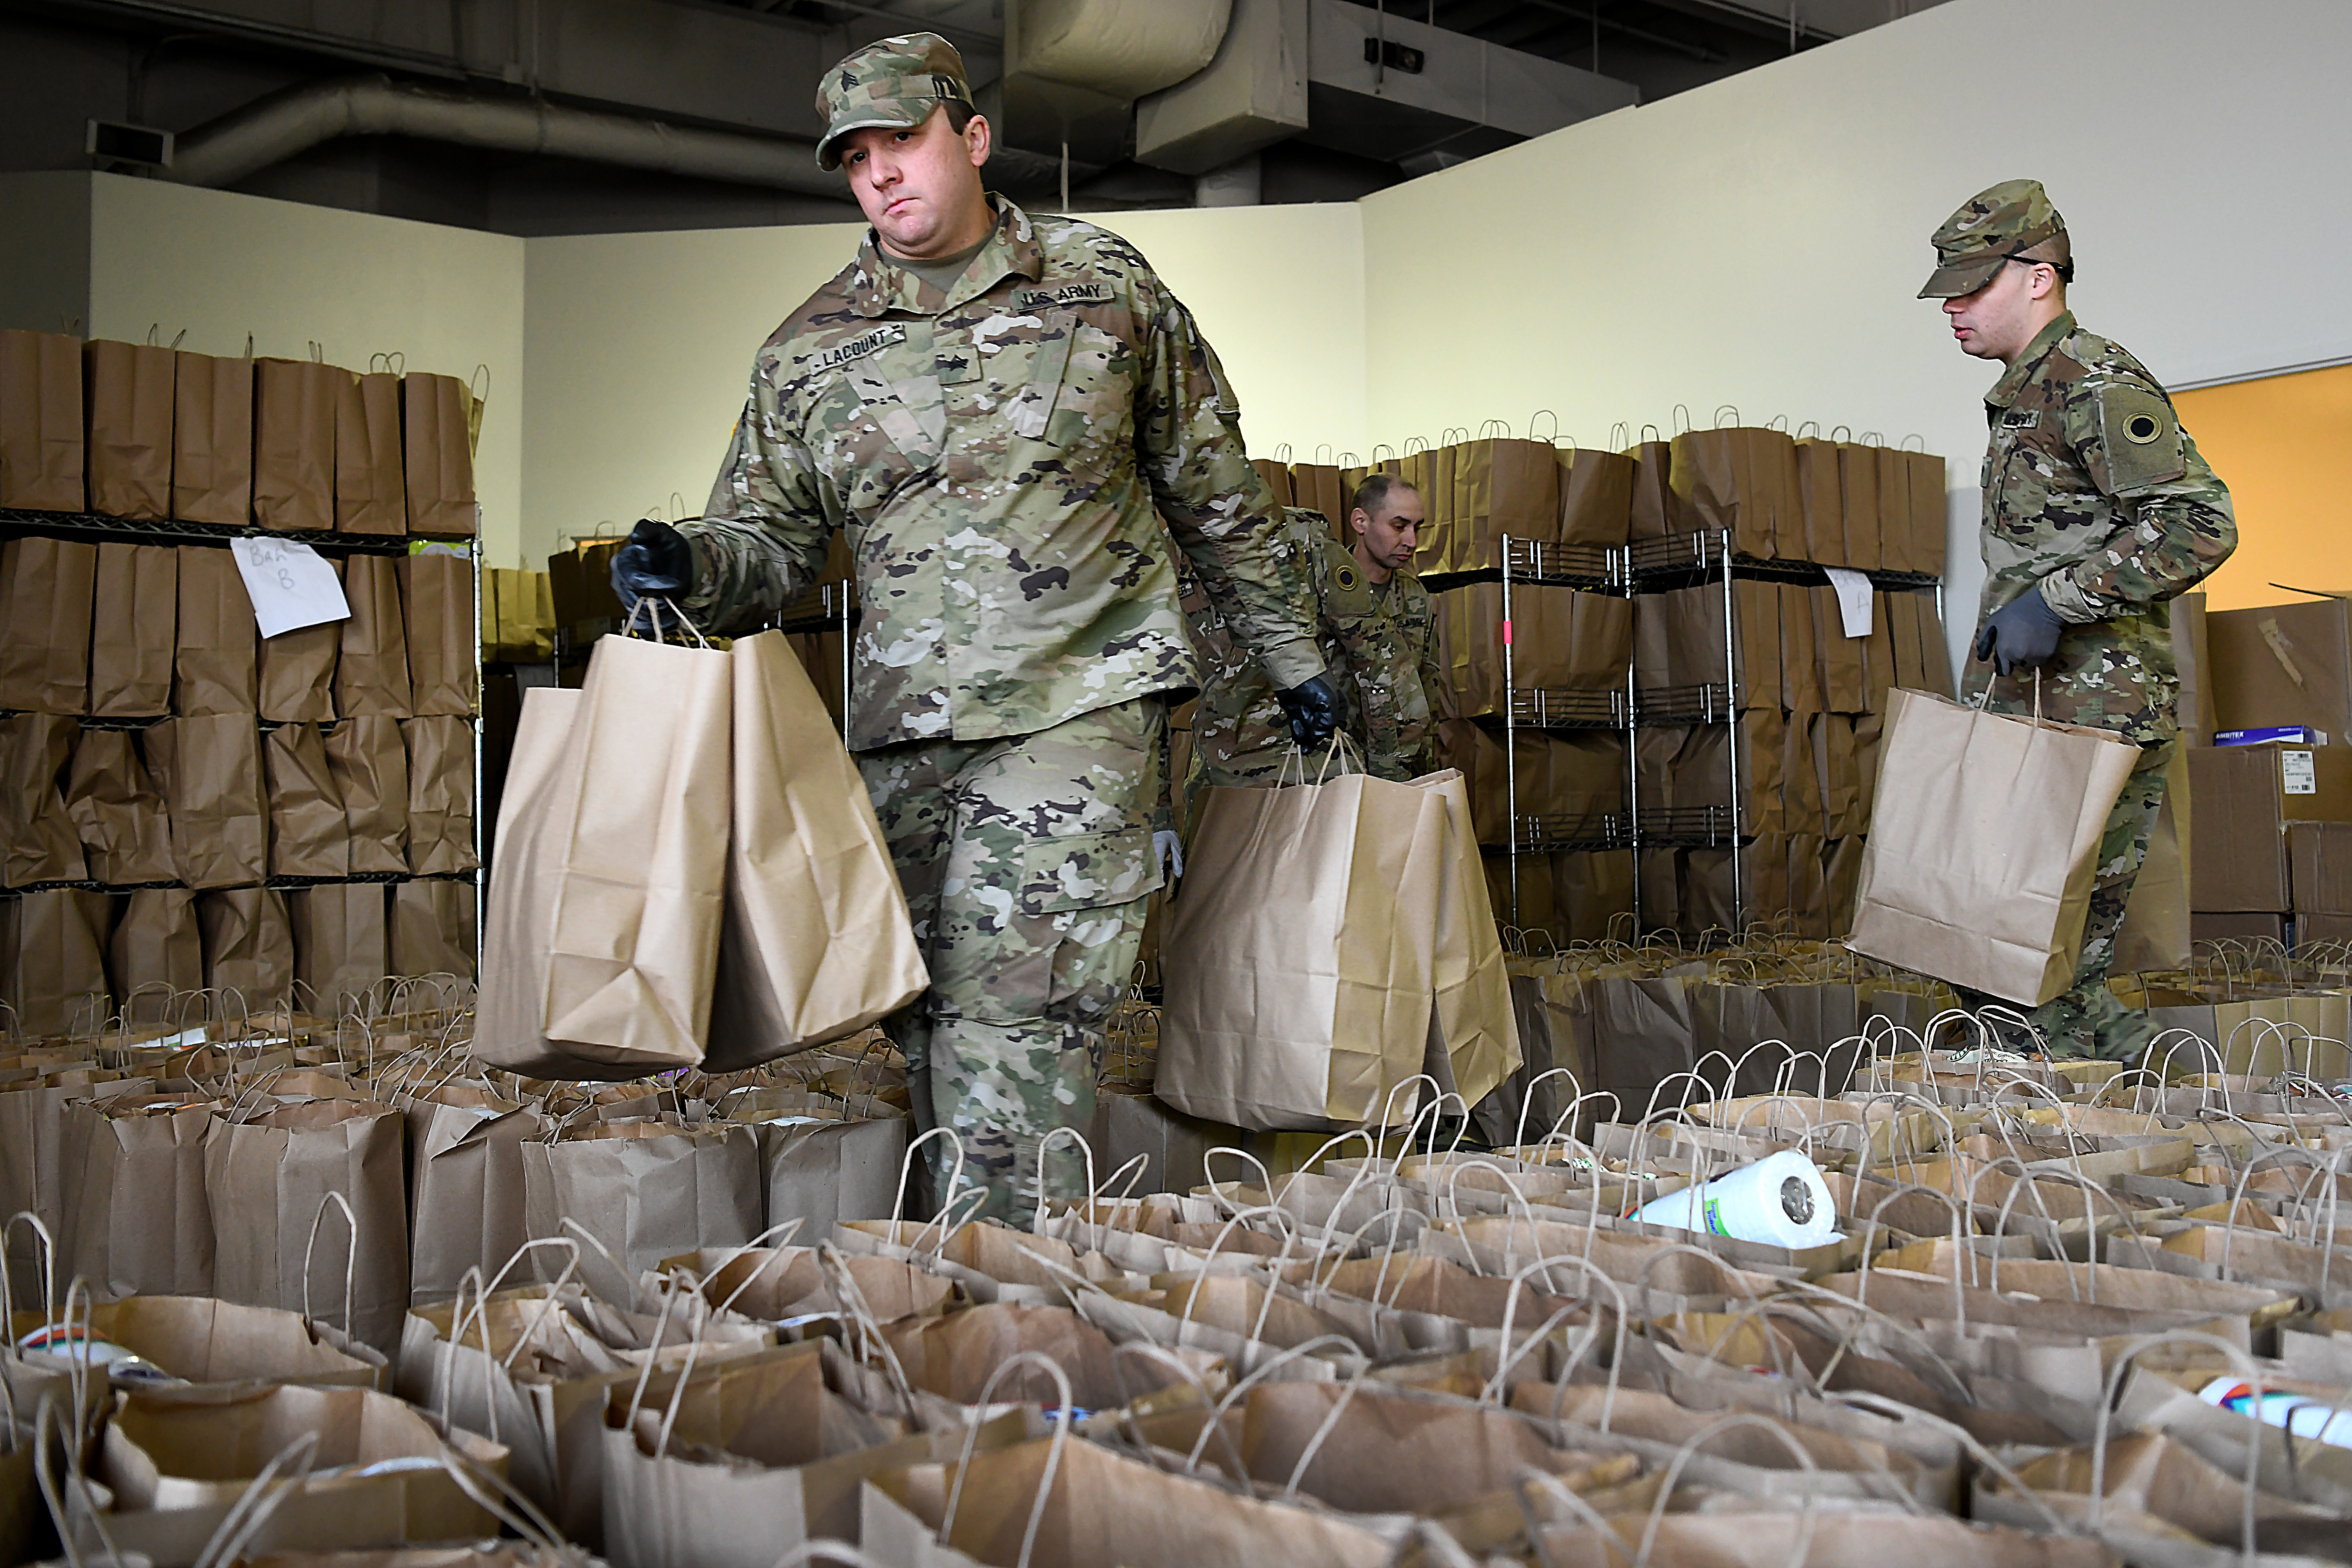 Soldiers gather bags of groceries.